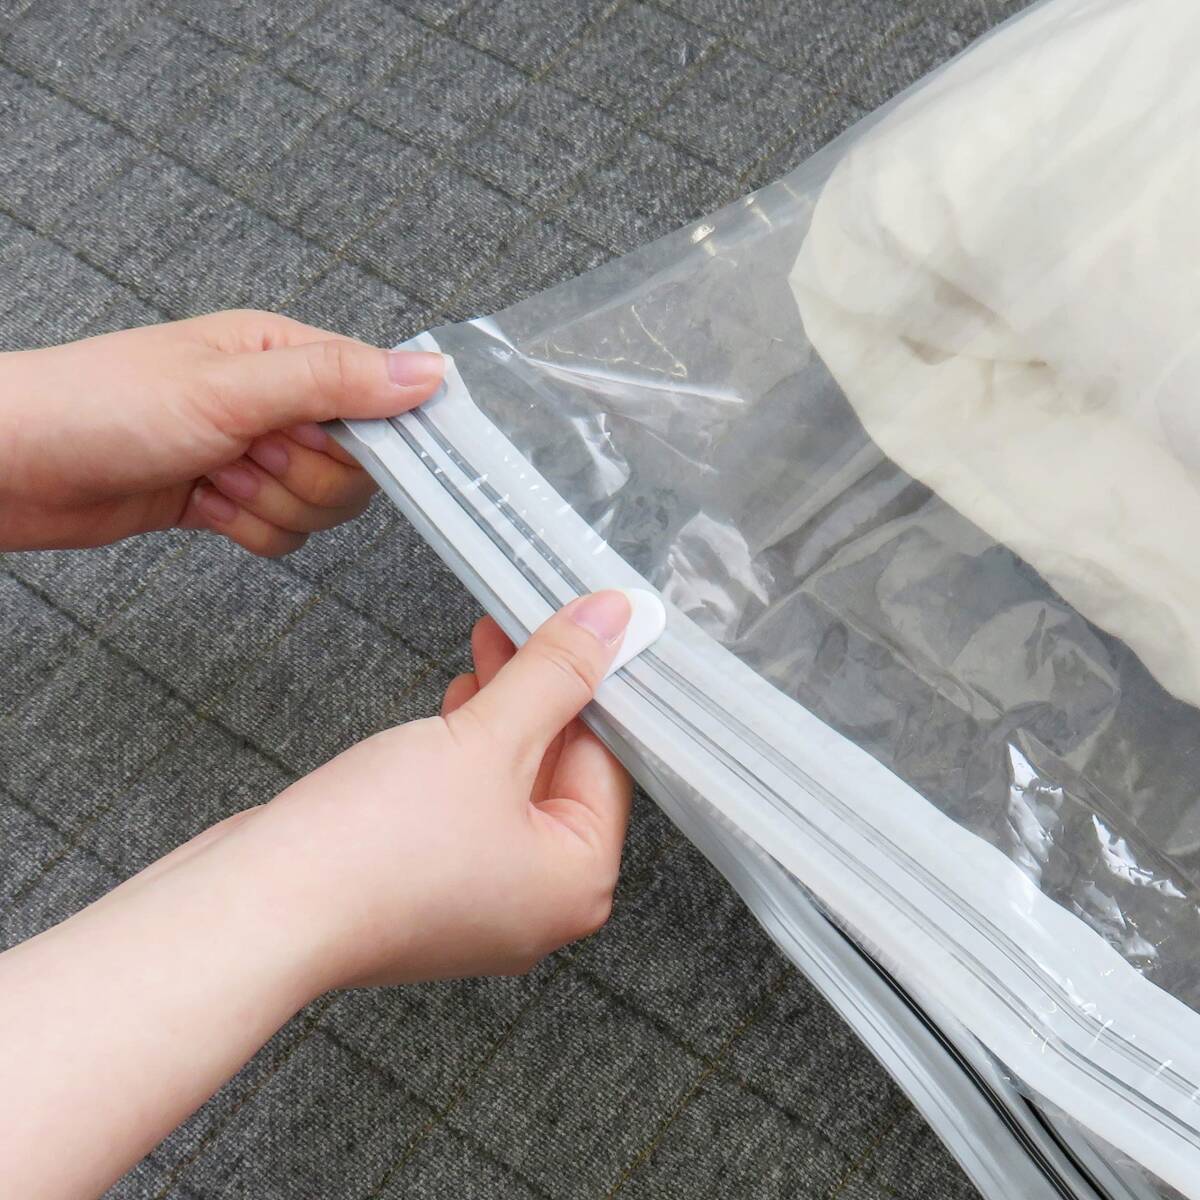  higashi peace industry vacuum bag STM. mites silver anti-bacterial futon compression pack M 2 sheets insertion clear approximately 100×110cm 2 piece set 80722